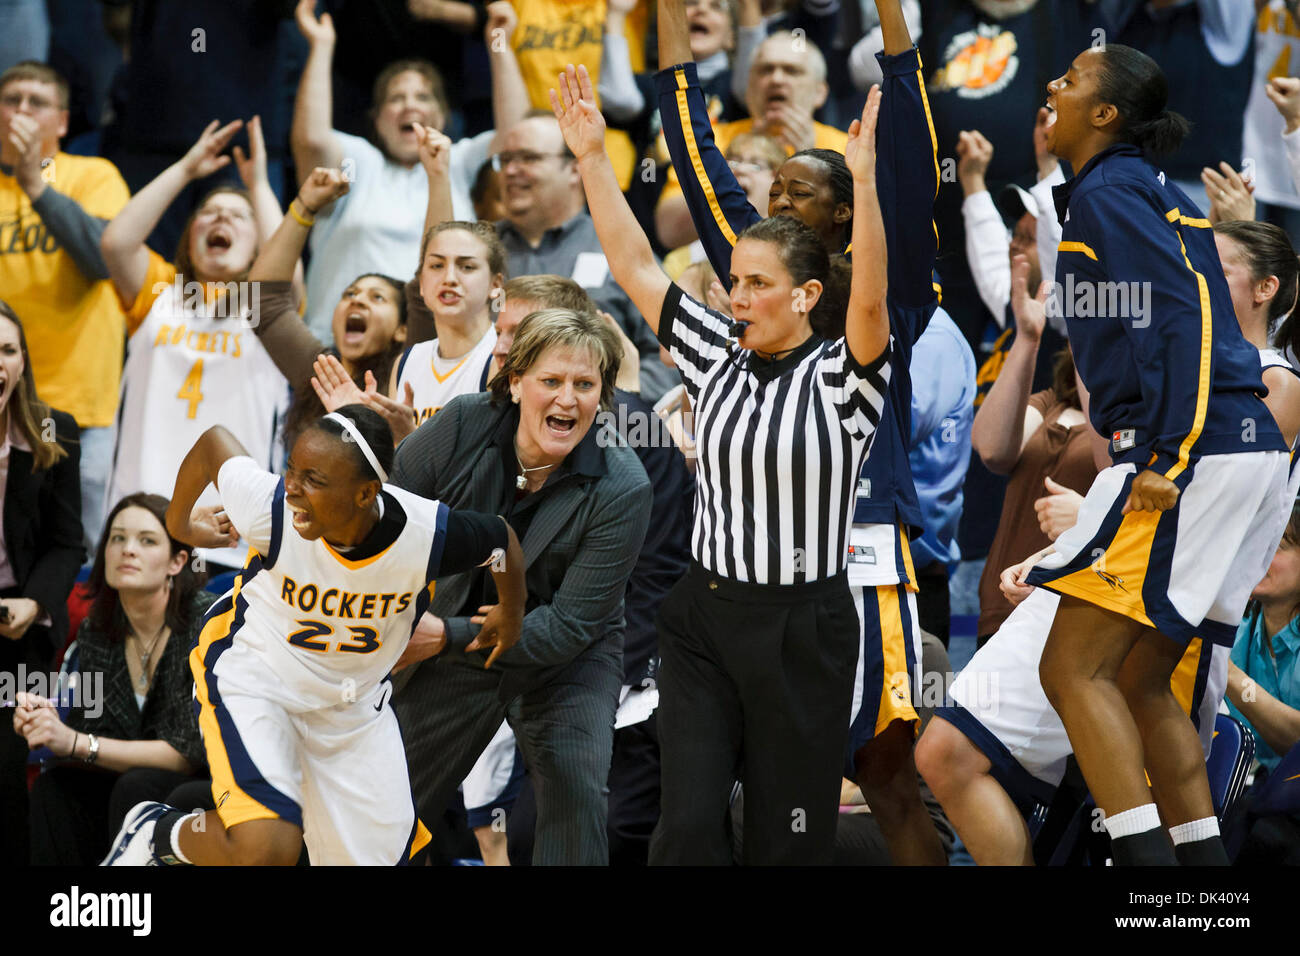 Mar. 16, 2011 - Toledo, Ohio, U.S - Toledo head coach Tricia Cullop, players, and fans celebrate guard Andola Dortch's (#22) game-winning three-pointer in the closing seconds of the game.  The Toledo Rockets, of the Mid-American Conference, defeated the Delaware Blue Hens, of the Colonial Athletic Association, 58-55 in the first round game of the 2011 Women's National Invitational  Stock Photo